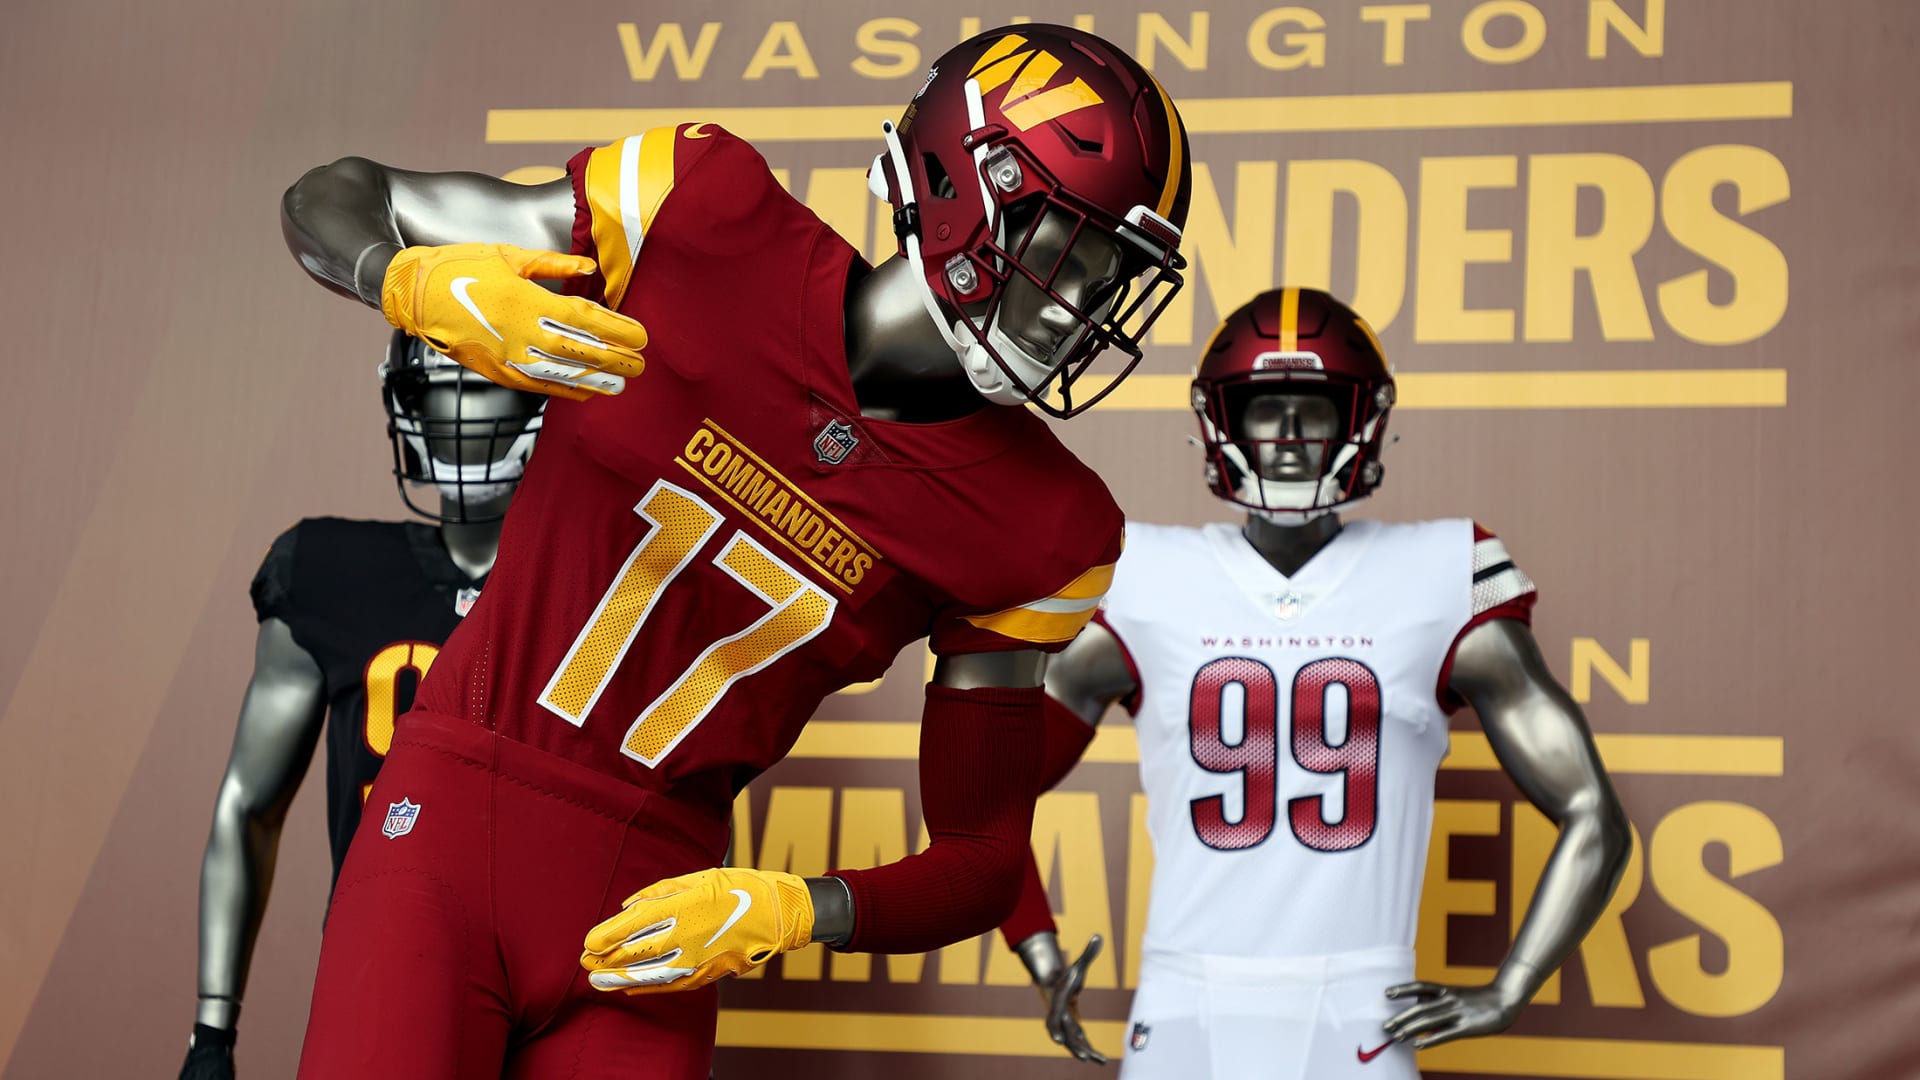 The new Washington Commanders uniforms following the announcement of the Washington Football Team's name change to the Washington Commanders.